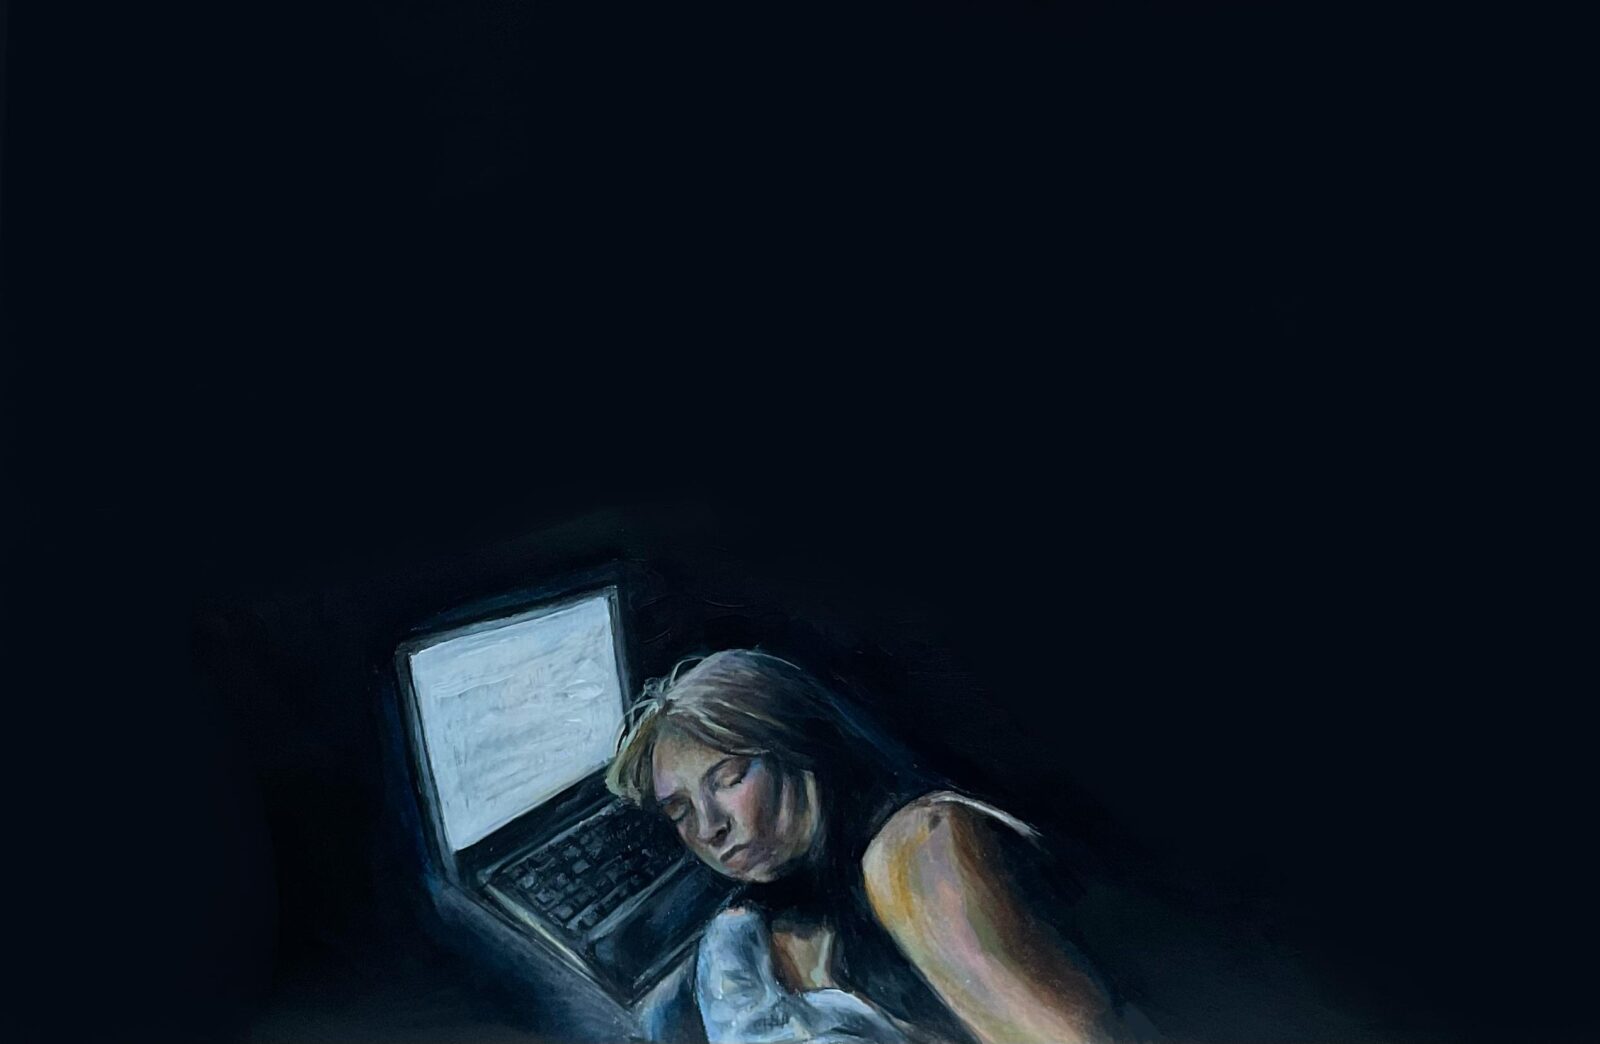 self-portrait with head on laptop on black background